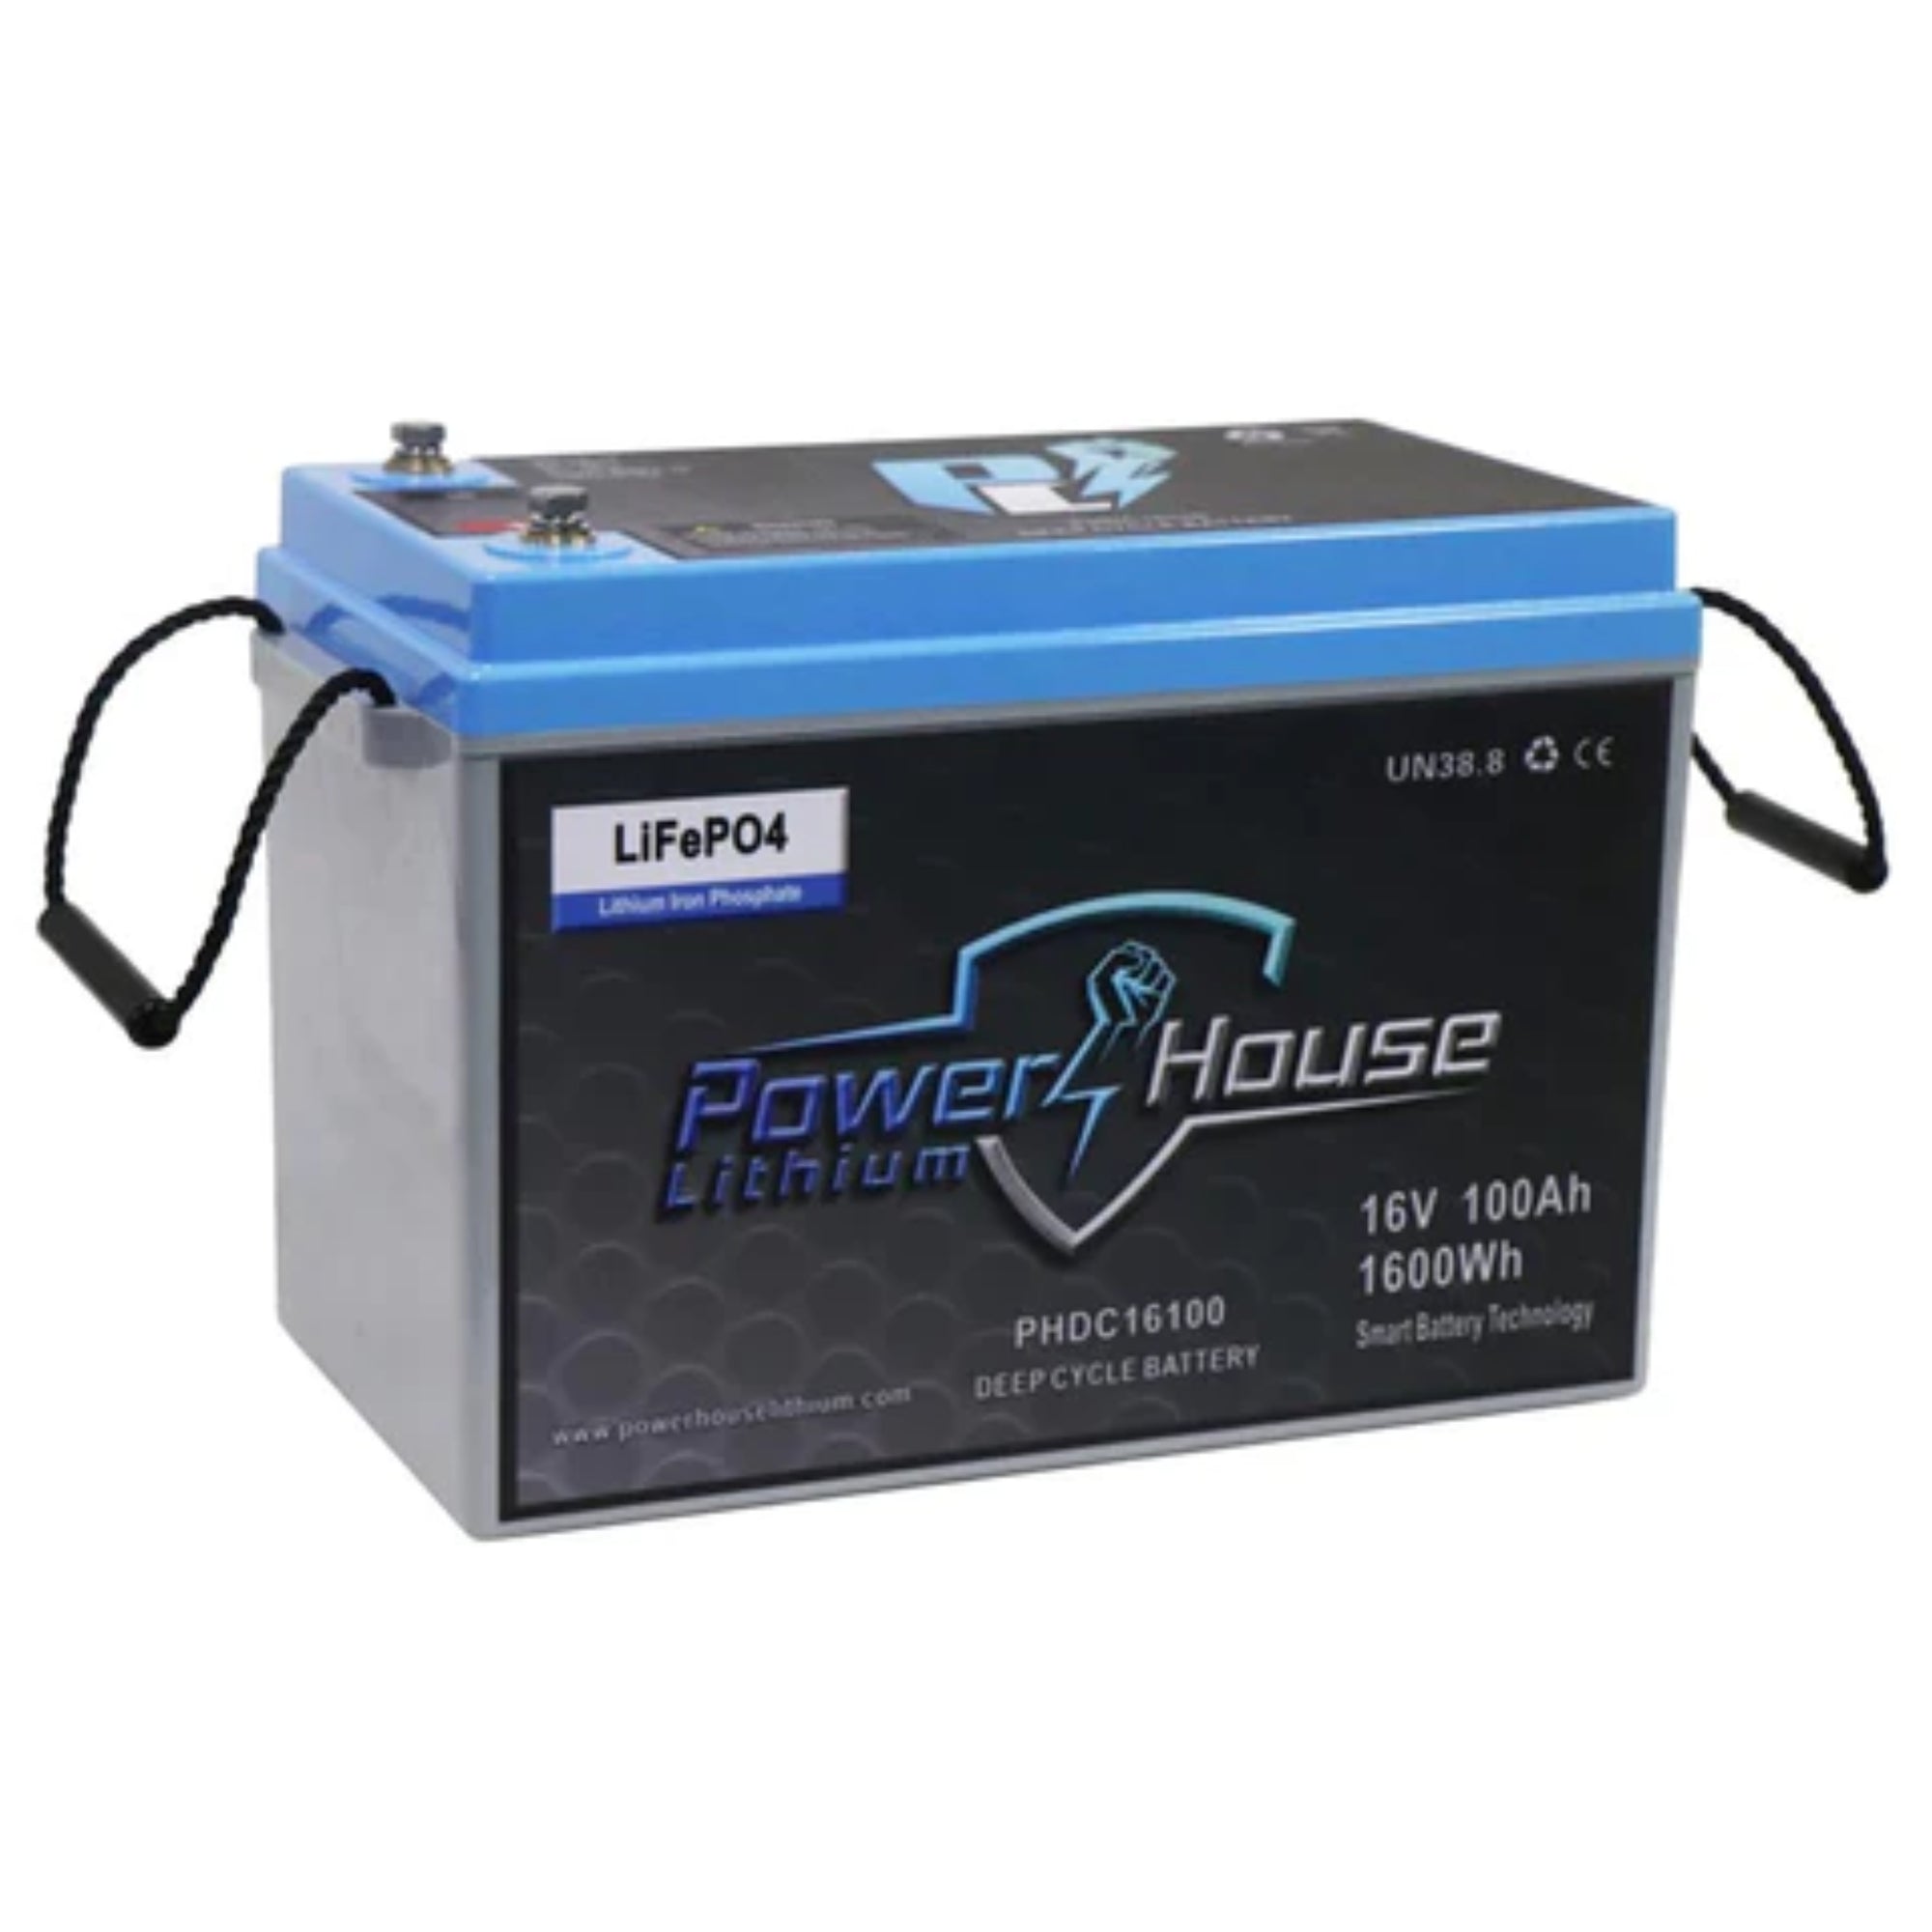 PowerHouse Lithium 16V 100Ah Deep Cycle Battery (5 to 6 Devices)